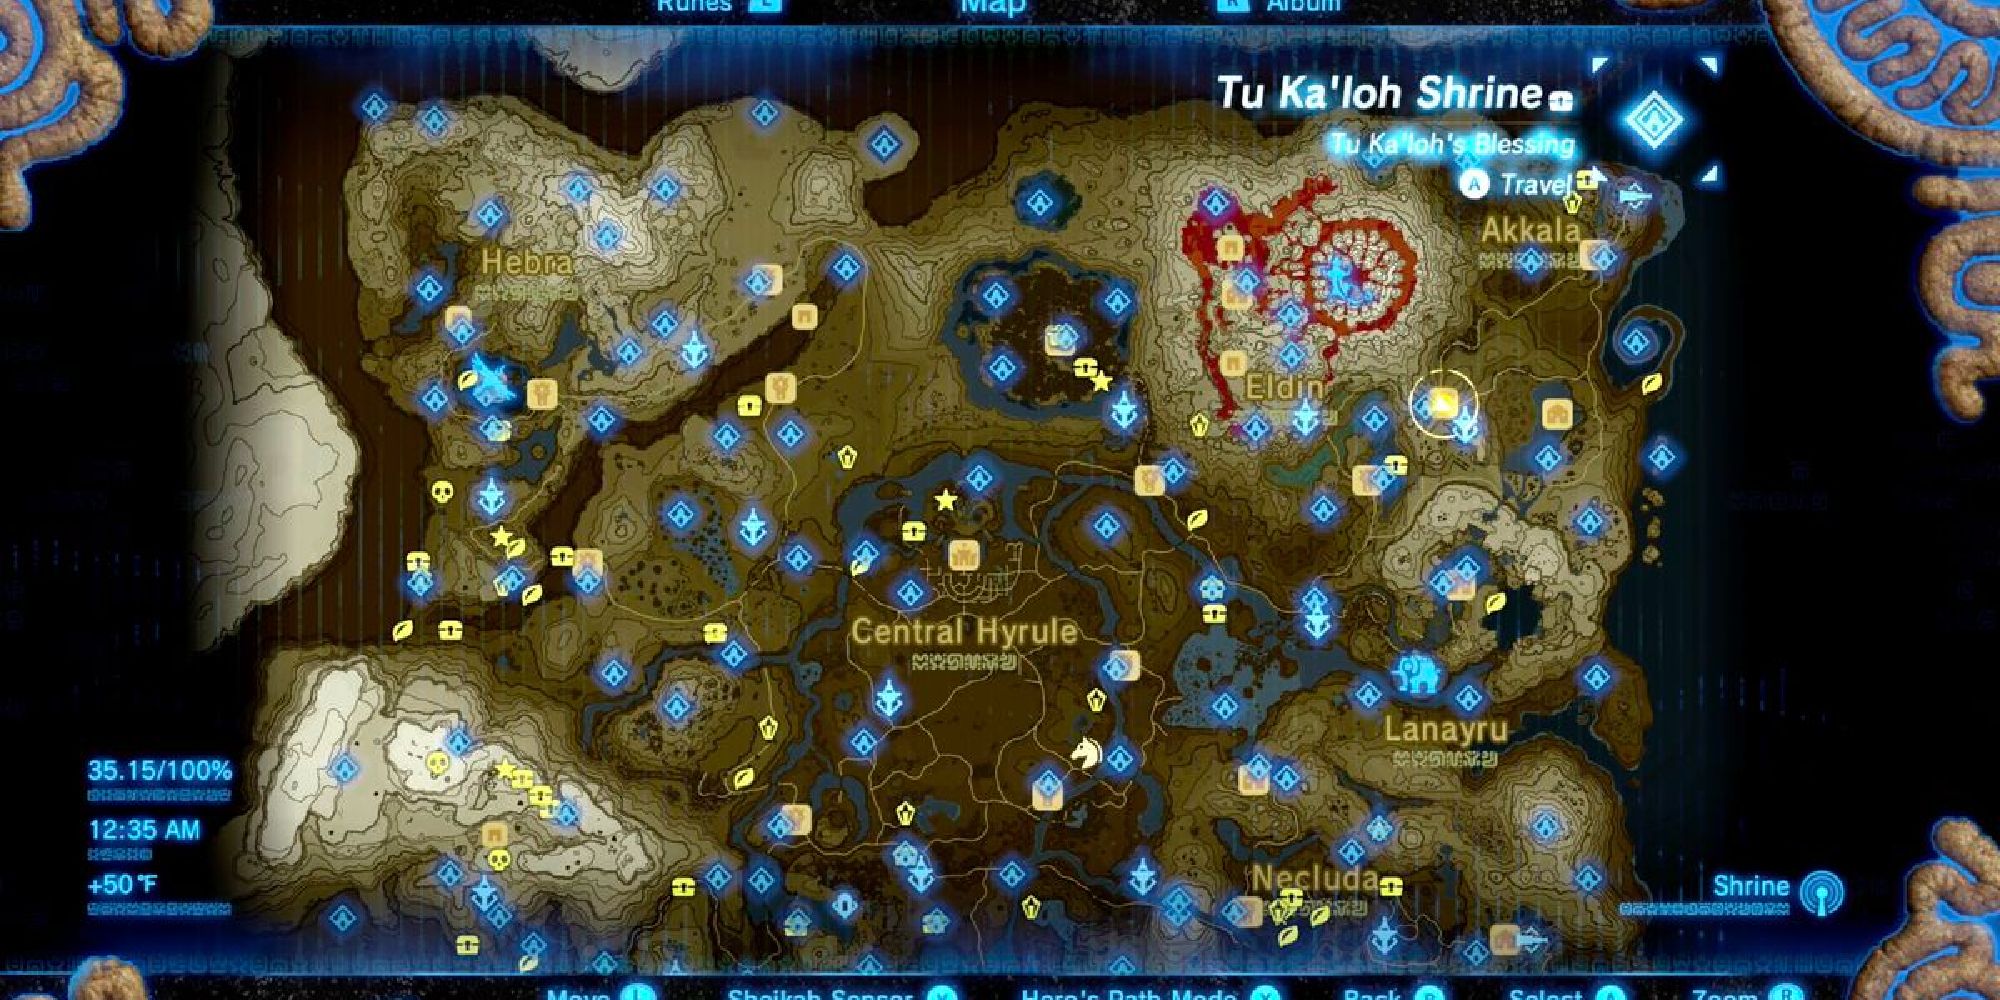 The completed map of BOTW showing all the shrine and Sheikah Tower locations to fast-travel between